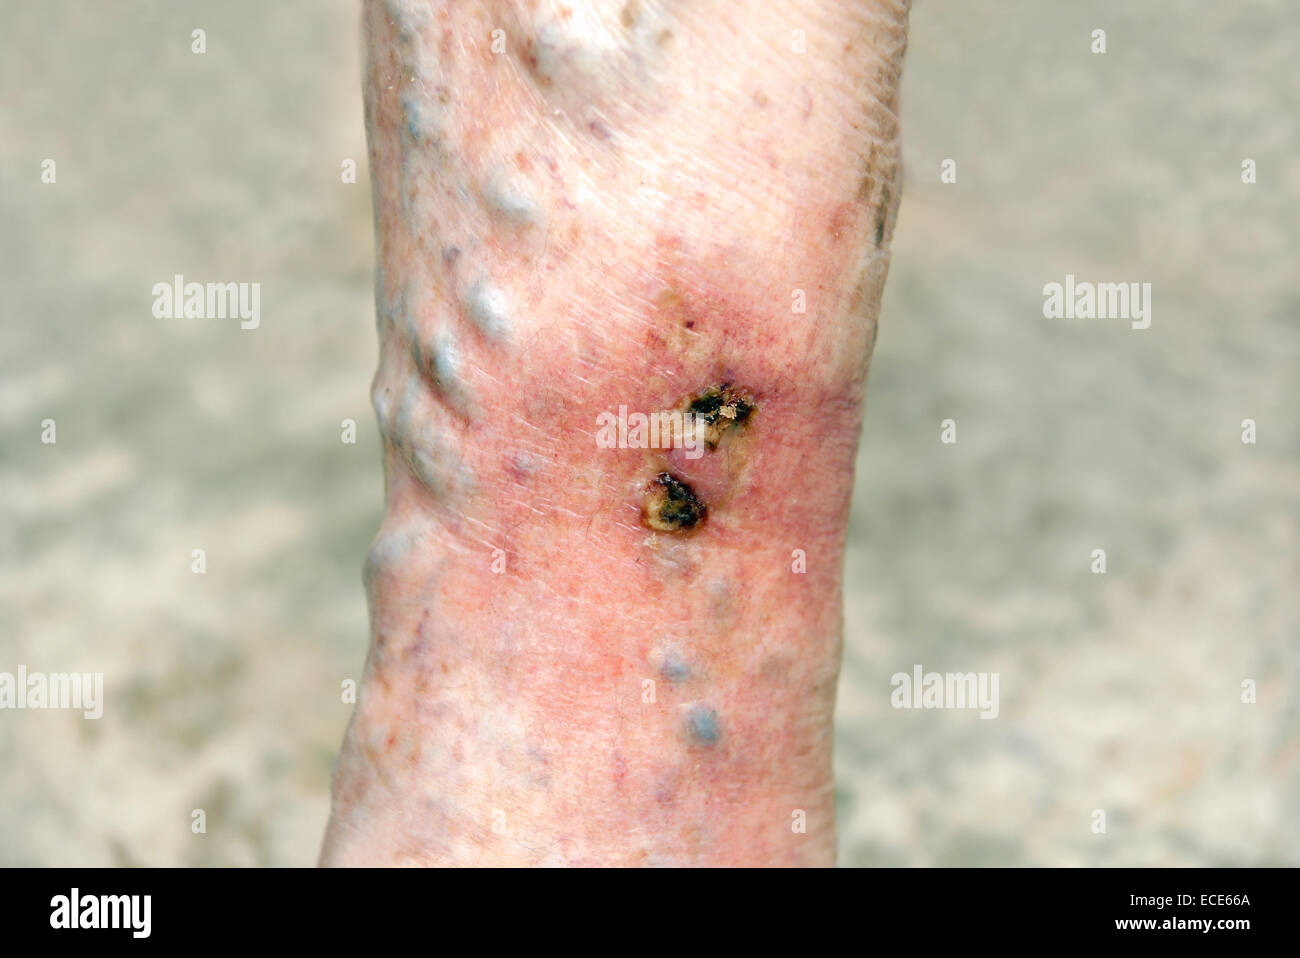 Varicose ulcers situated on a ruptured varicose vein inflamed & very painful Stock Photo